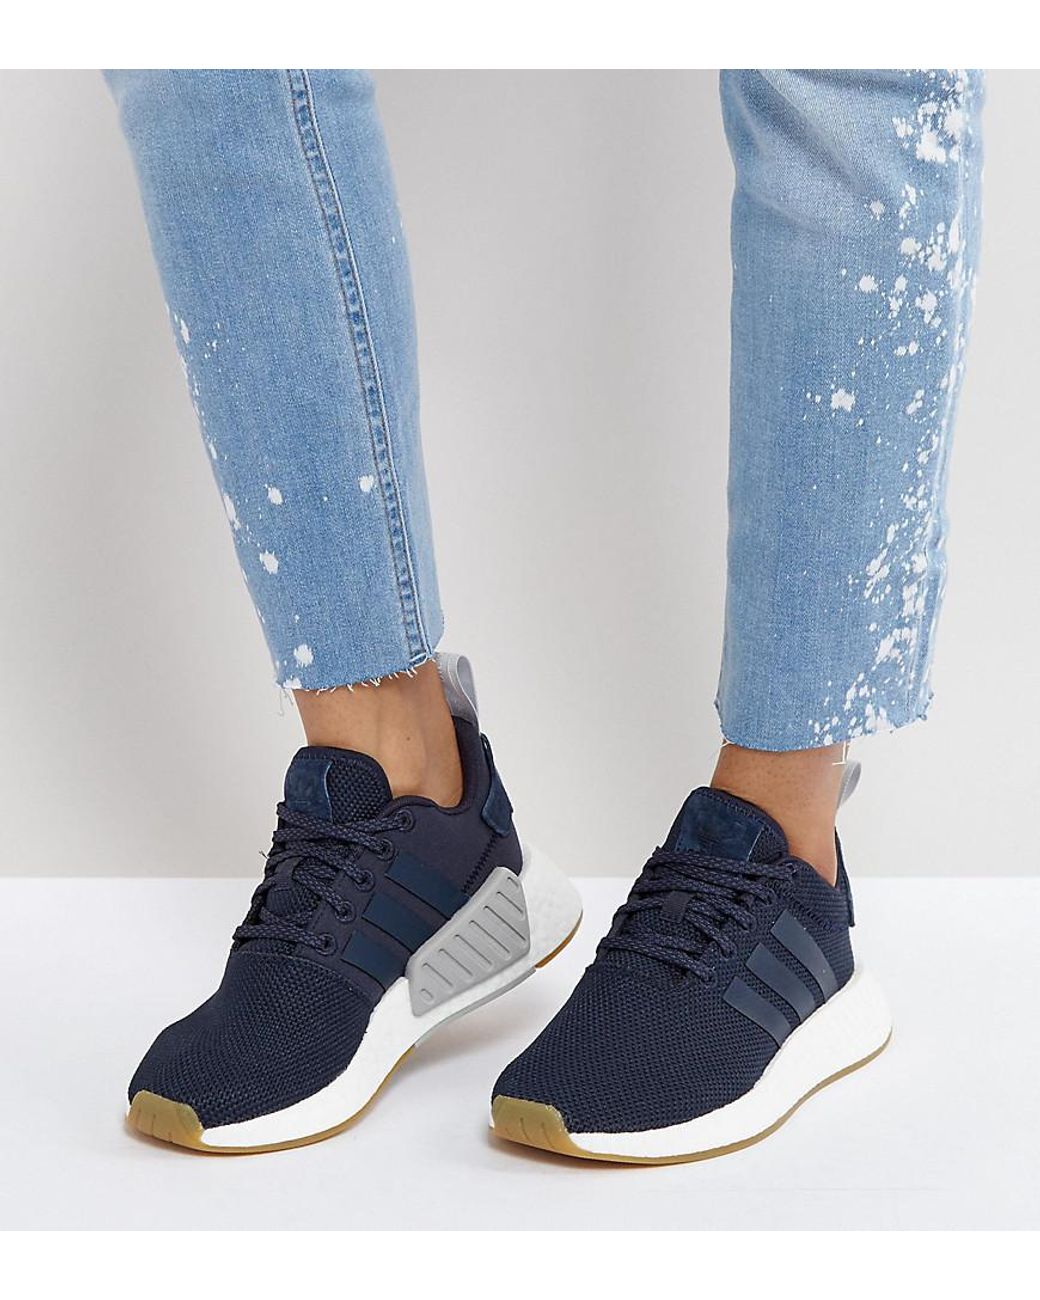 Women's Navy Blue Adidas Shoes